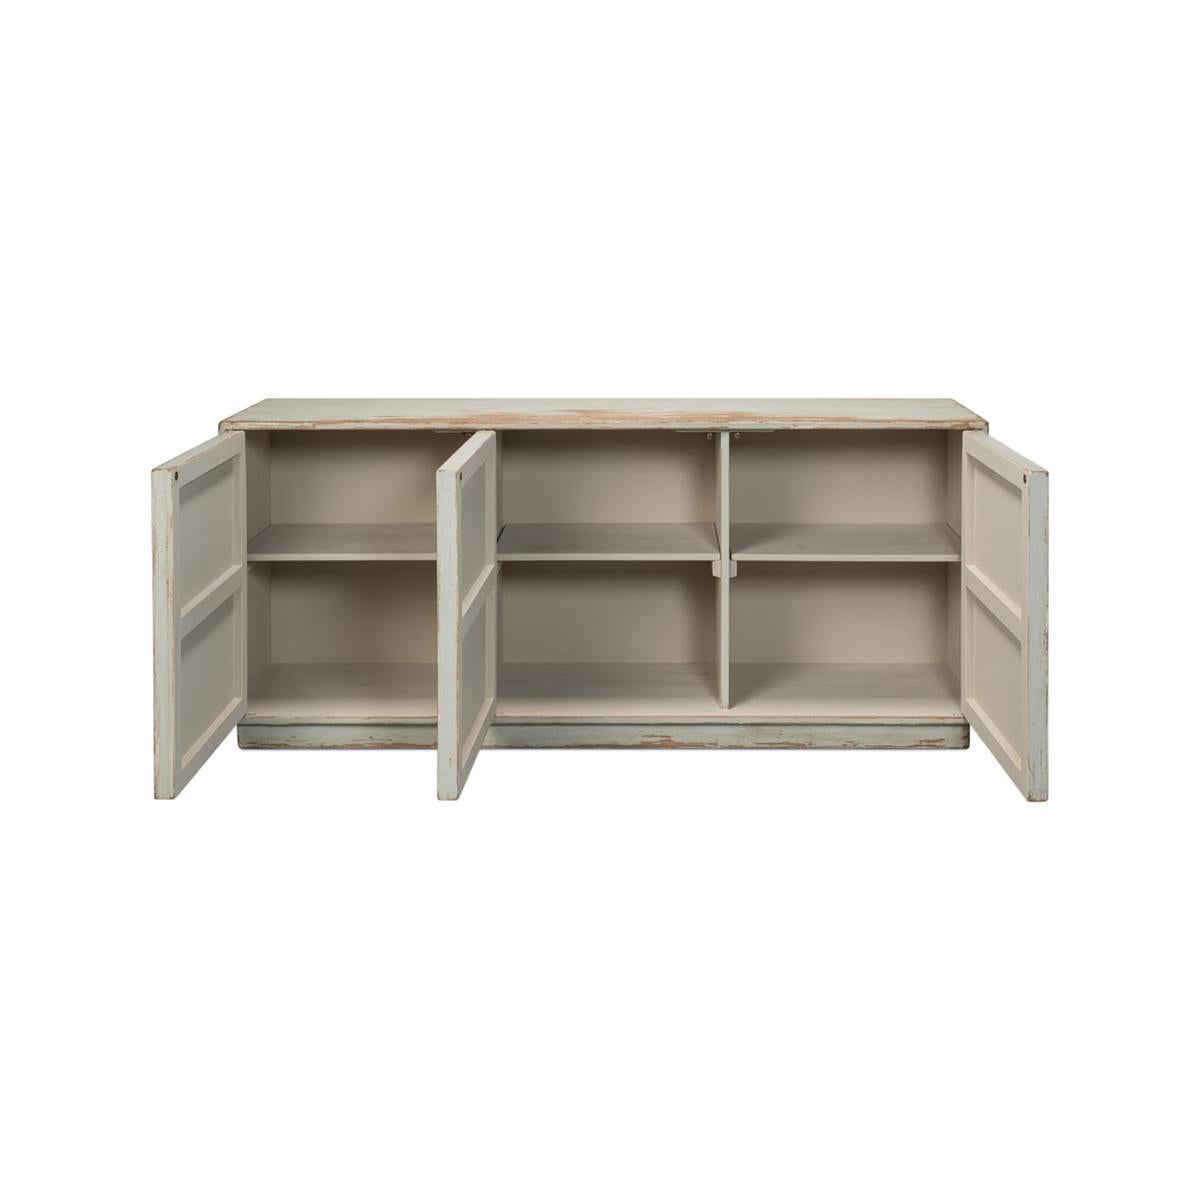 Asian Rustic Modern Louvered Sideboard - Sage For Sale